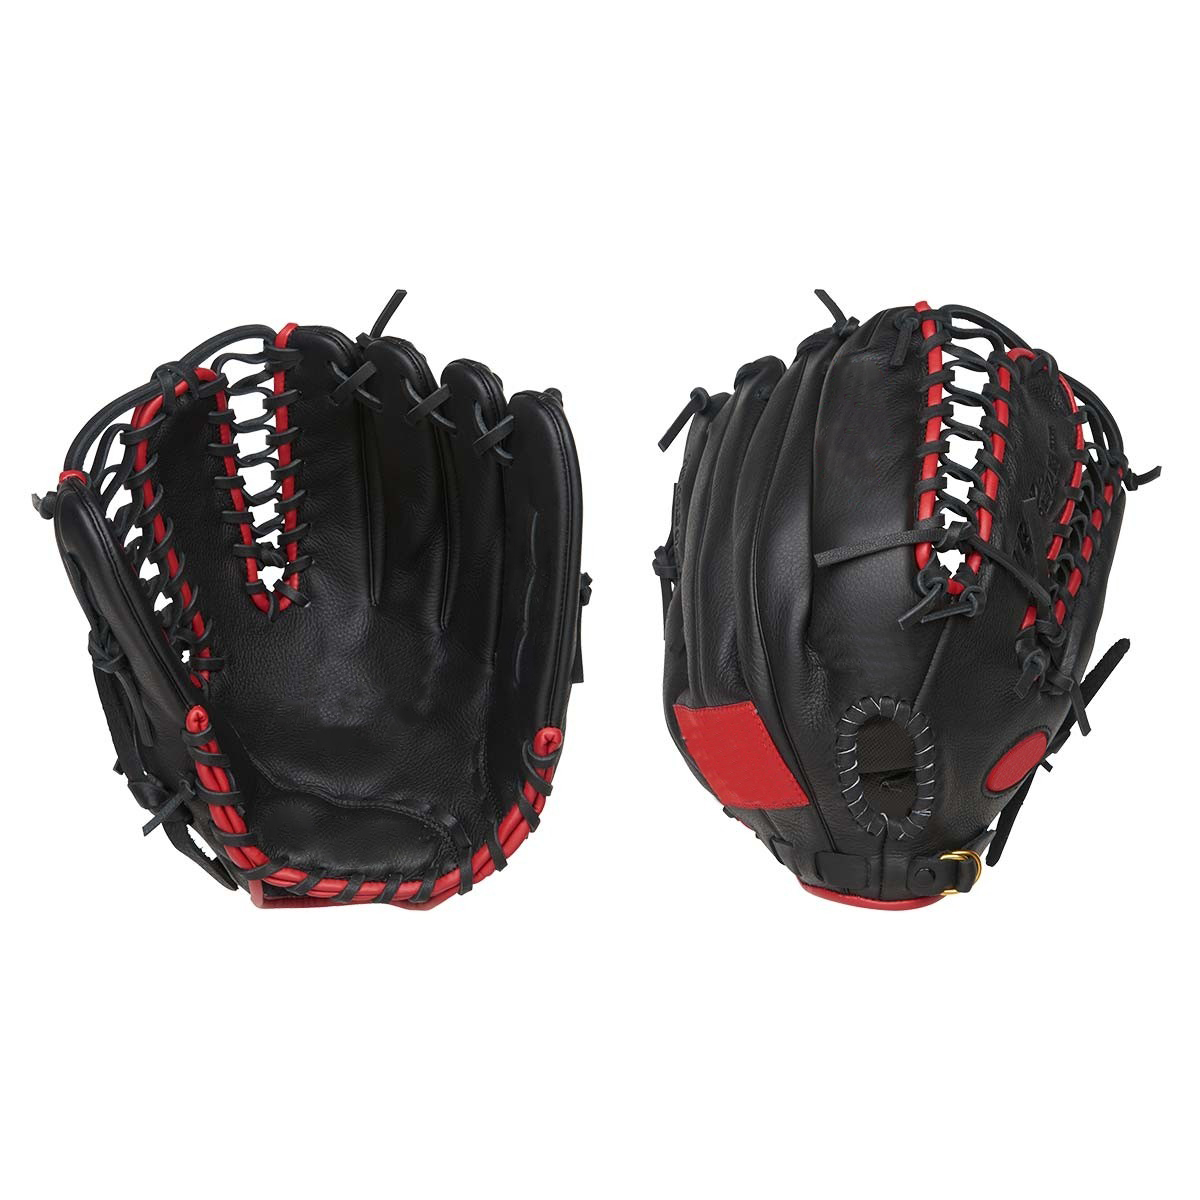 12.25" Lightweight soft leather wear-resistant youth baseball gloves